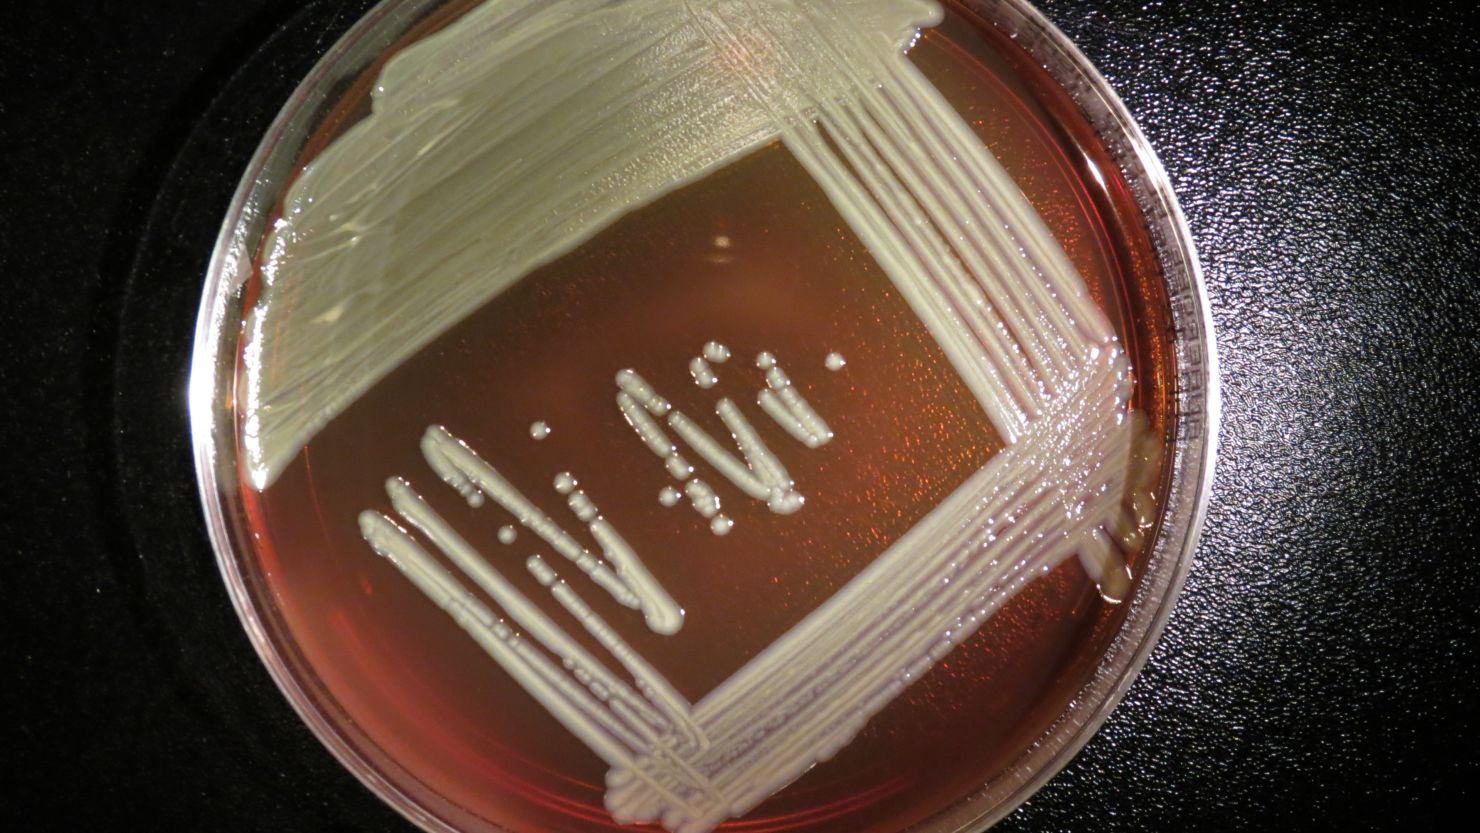 Elizabethkingia anophelis grows on a blood agar plate. It doesn't commonly cause illness in humans